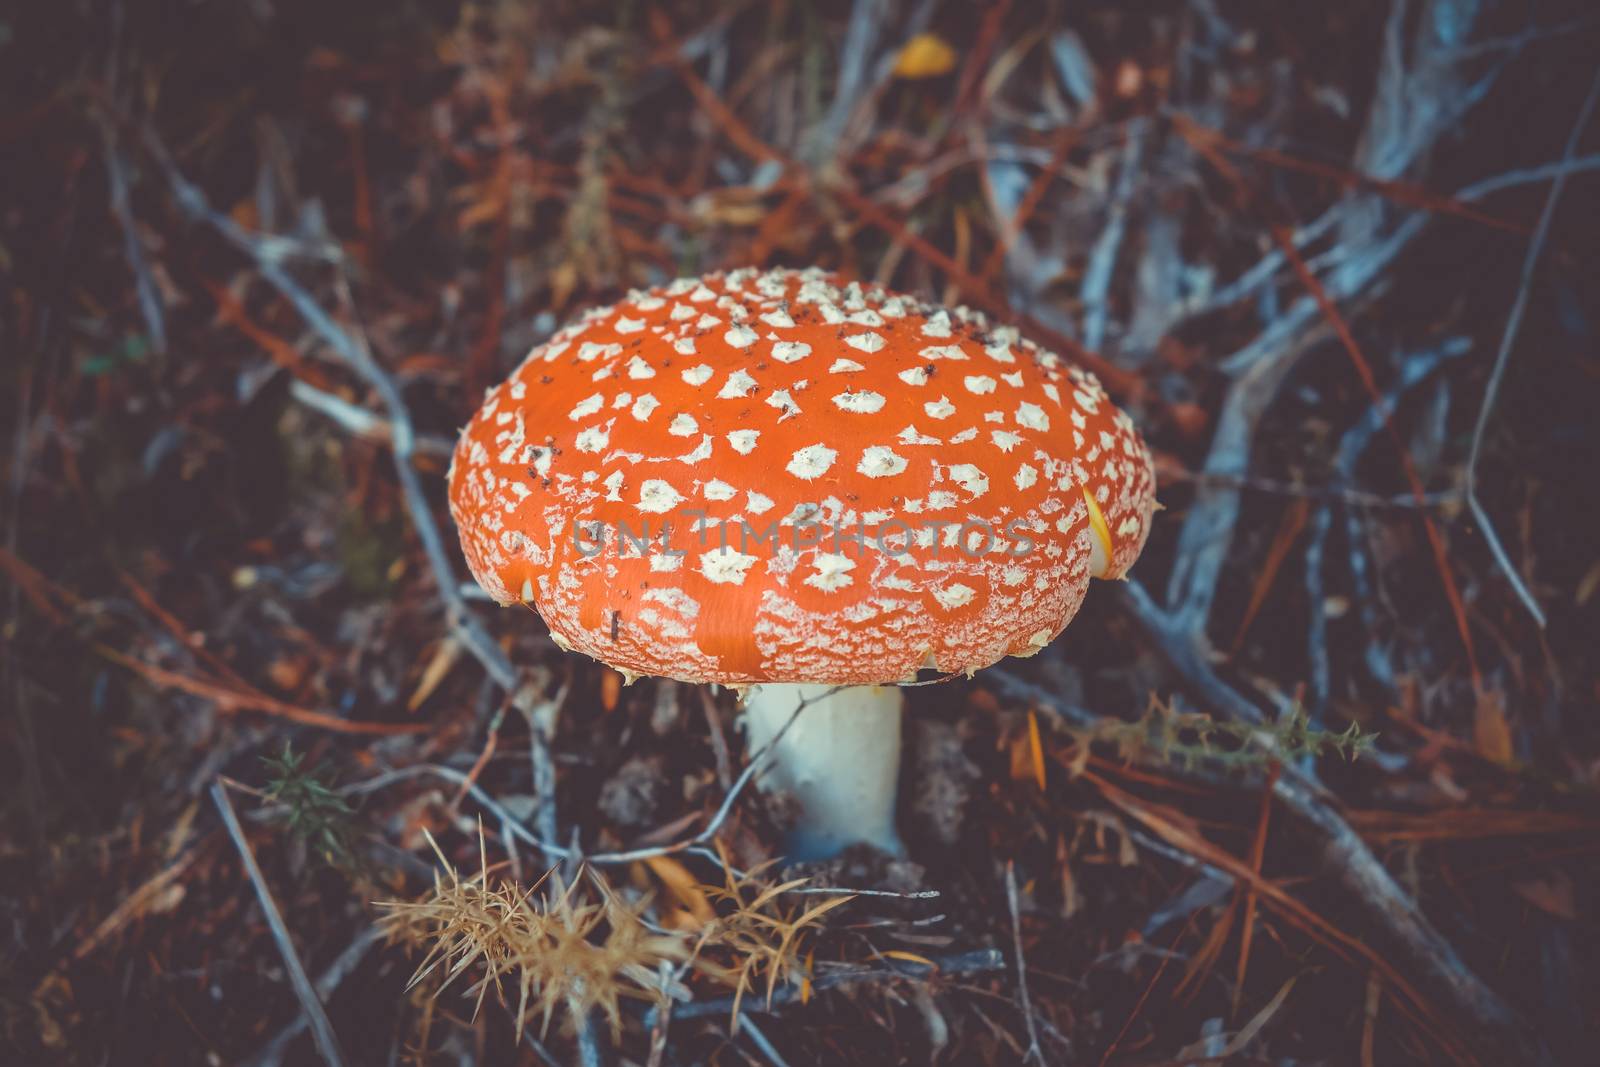 Amanita muscaria. fly agaric toadstool by daboost